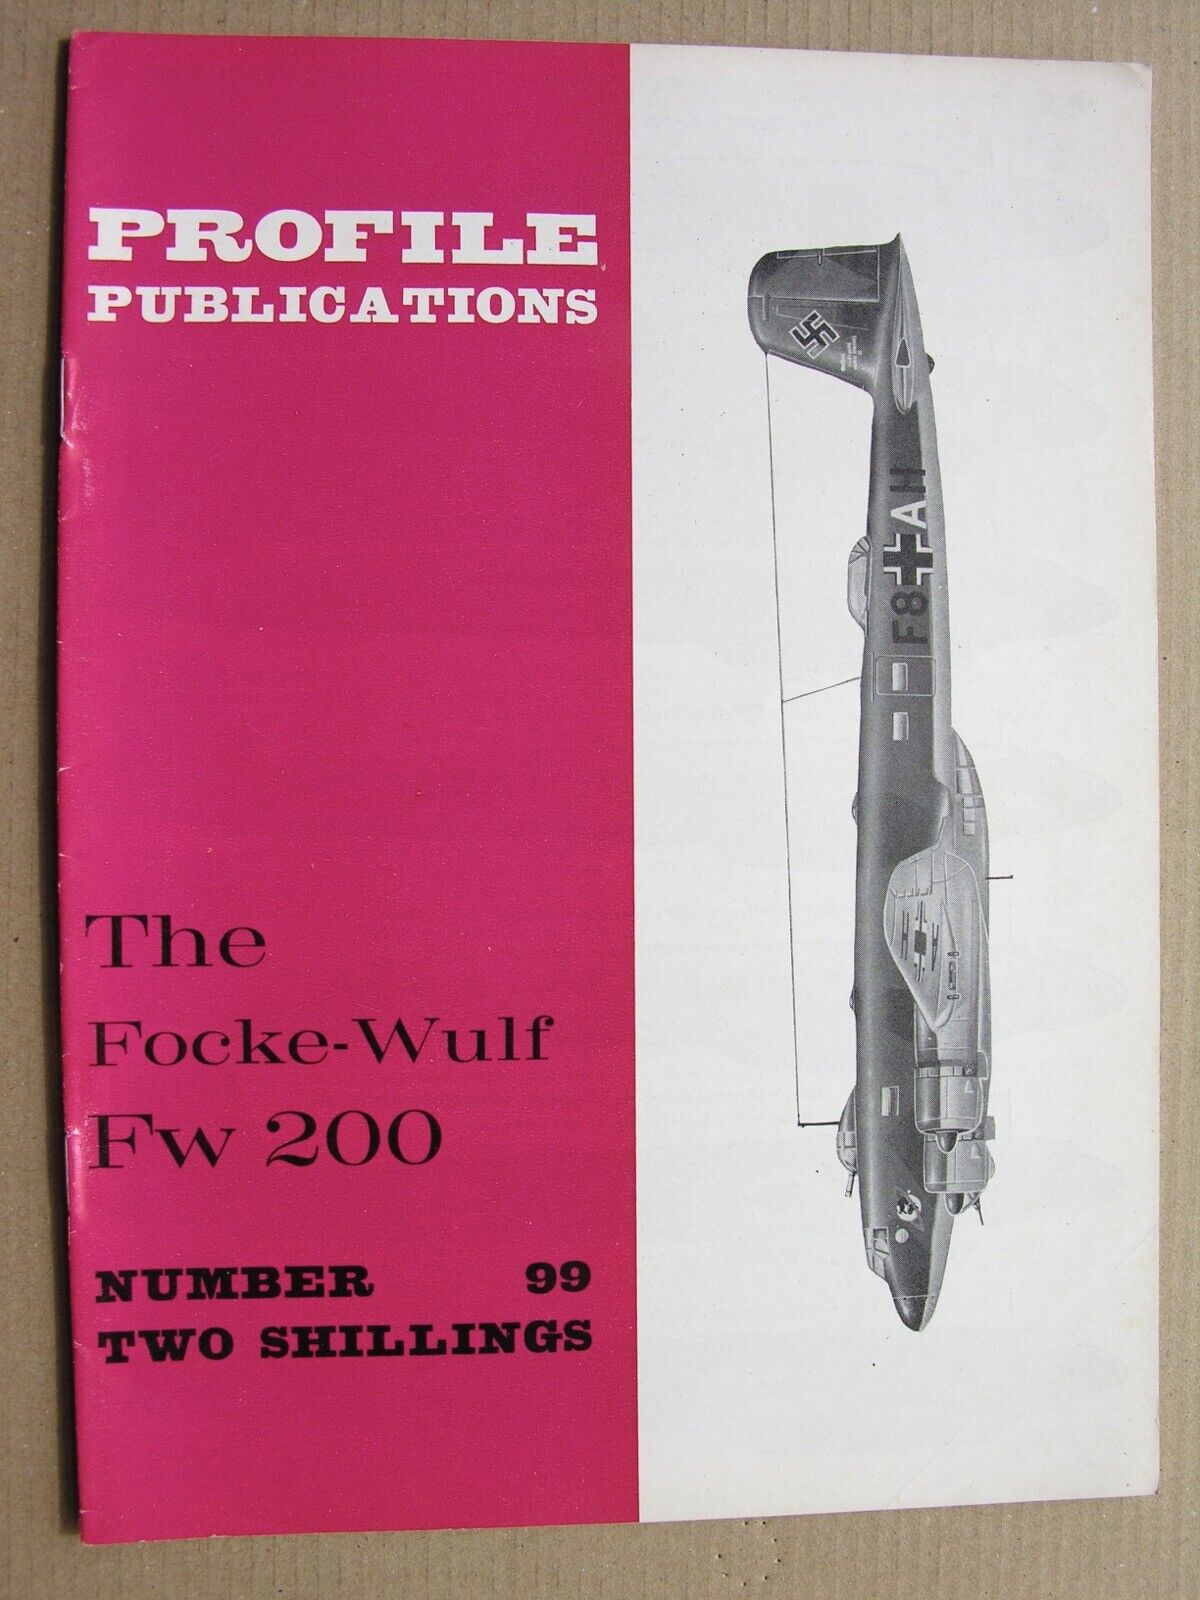 THE FOCKE-WULF Fw 200 Profile Publications No 99 Aircraft Richard Smith 16 pages